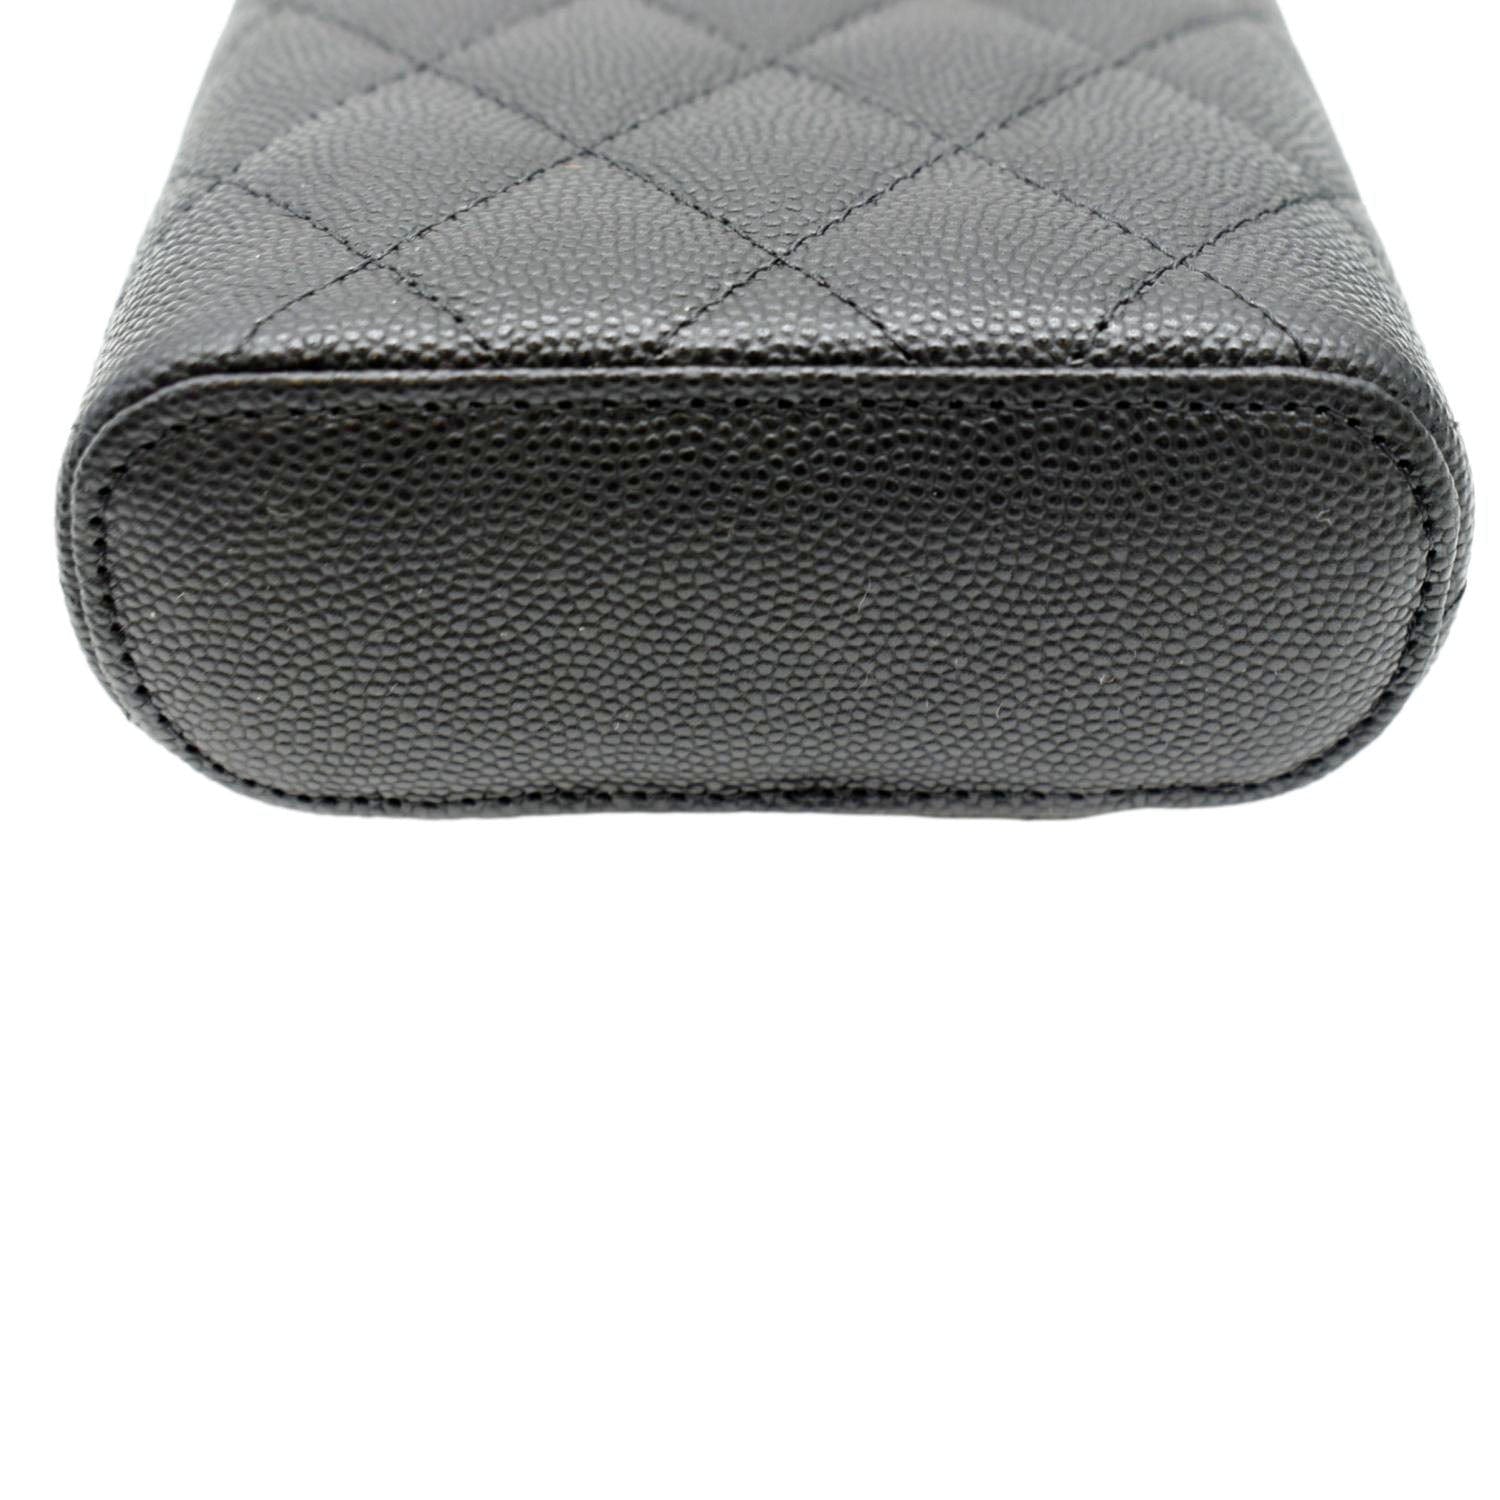 Chanel Caviar Quilted Vanity Phone Case Bag Black